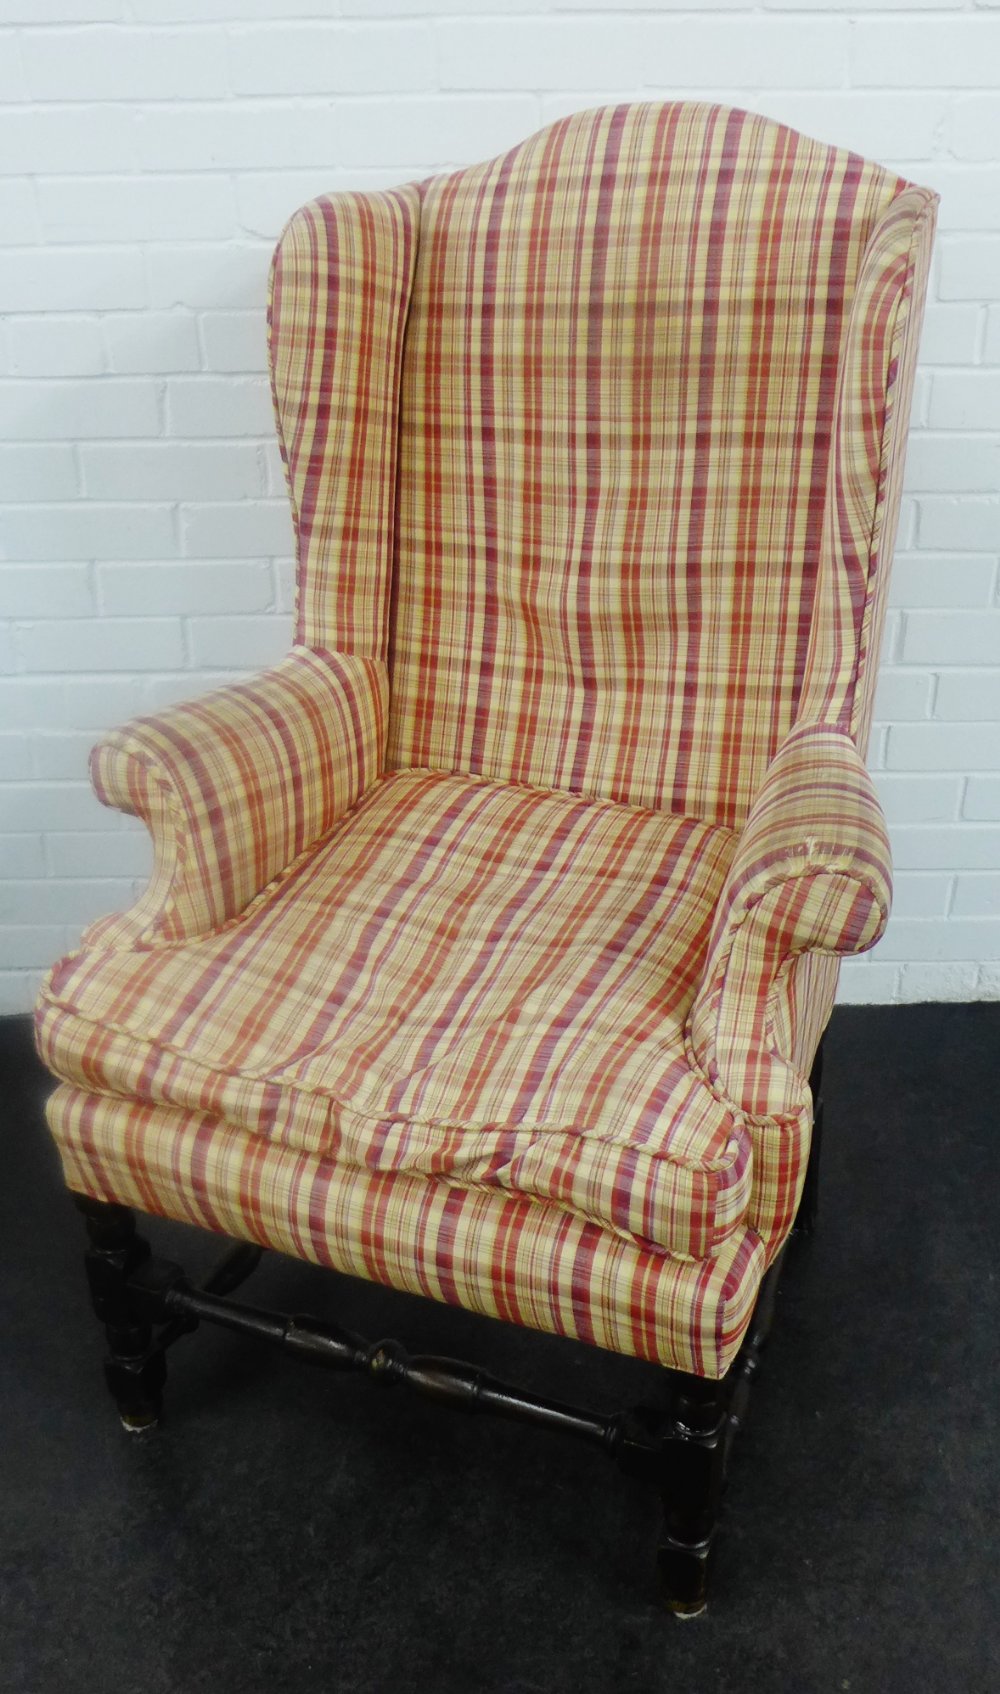 Upholstered wingback chair, 122 x 63cm